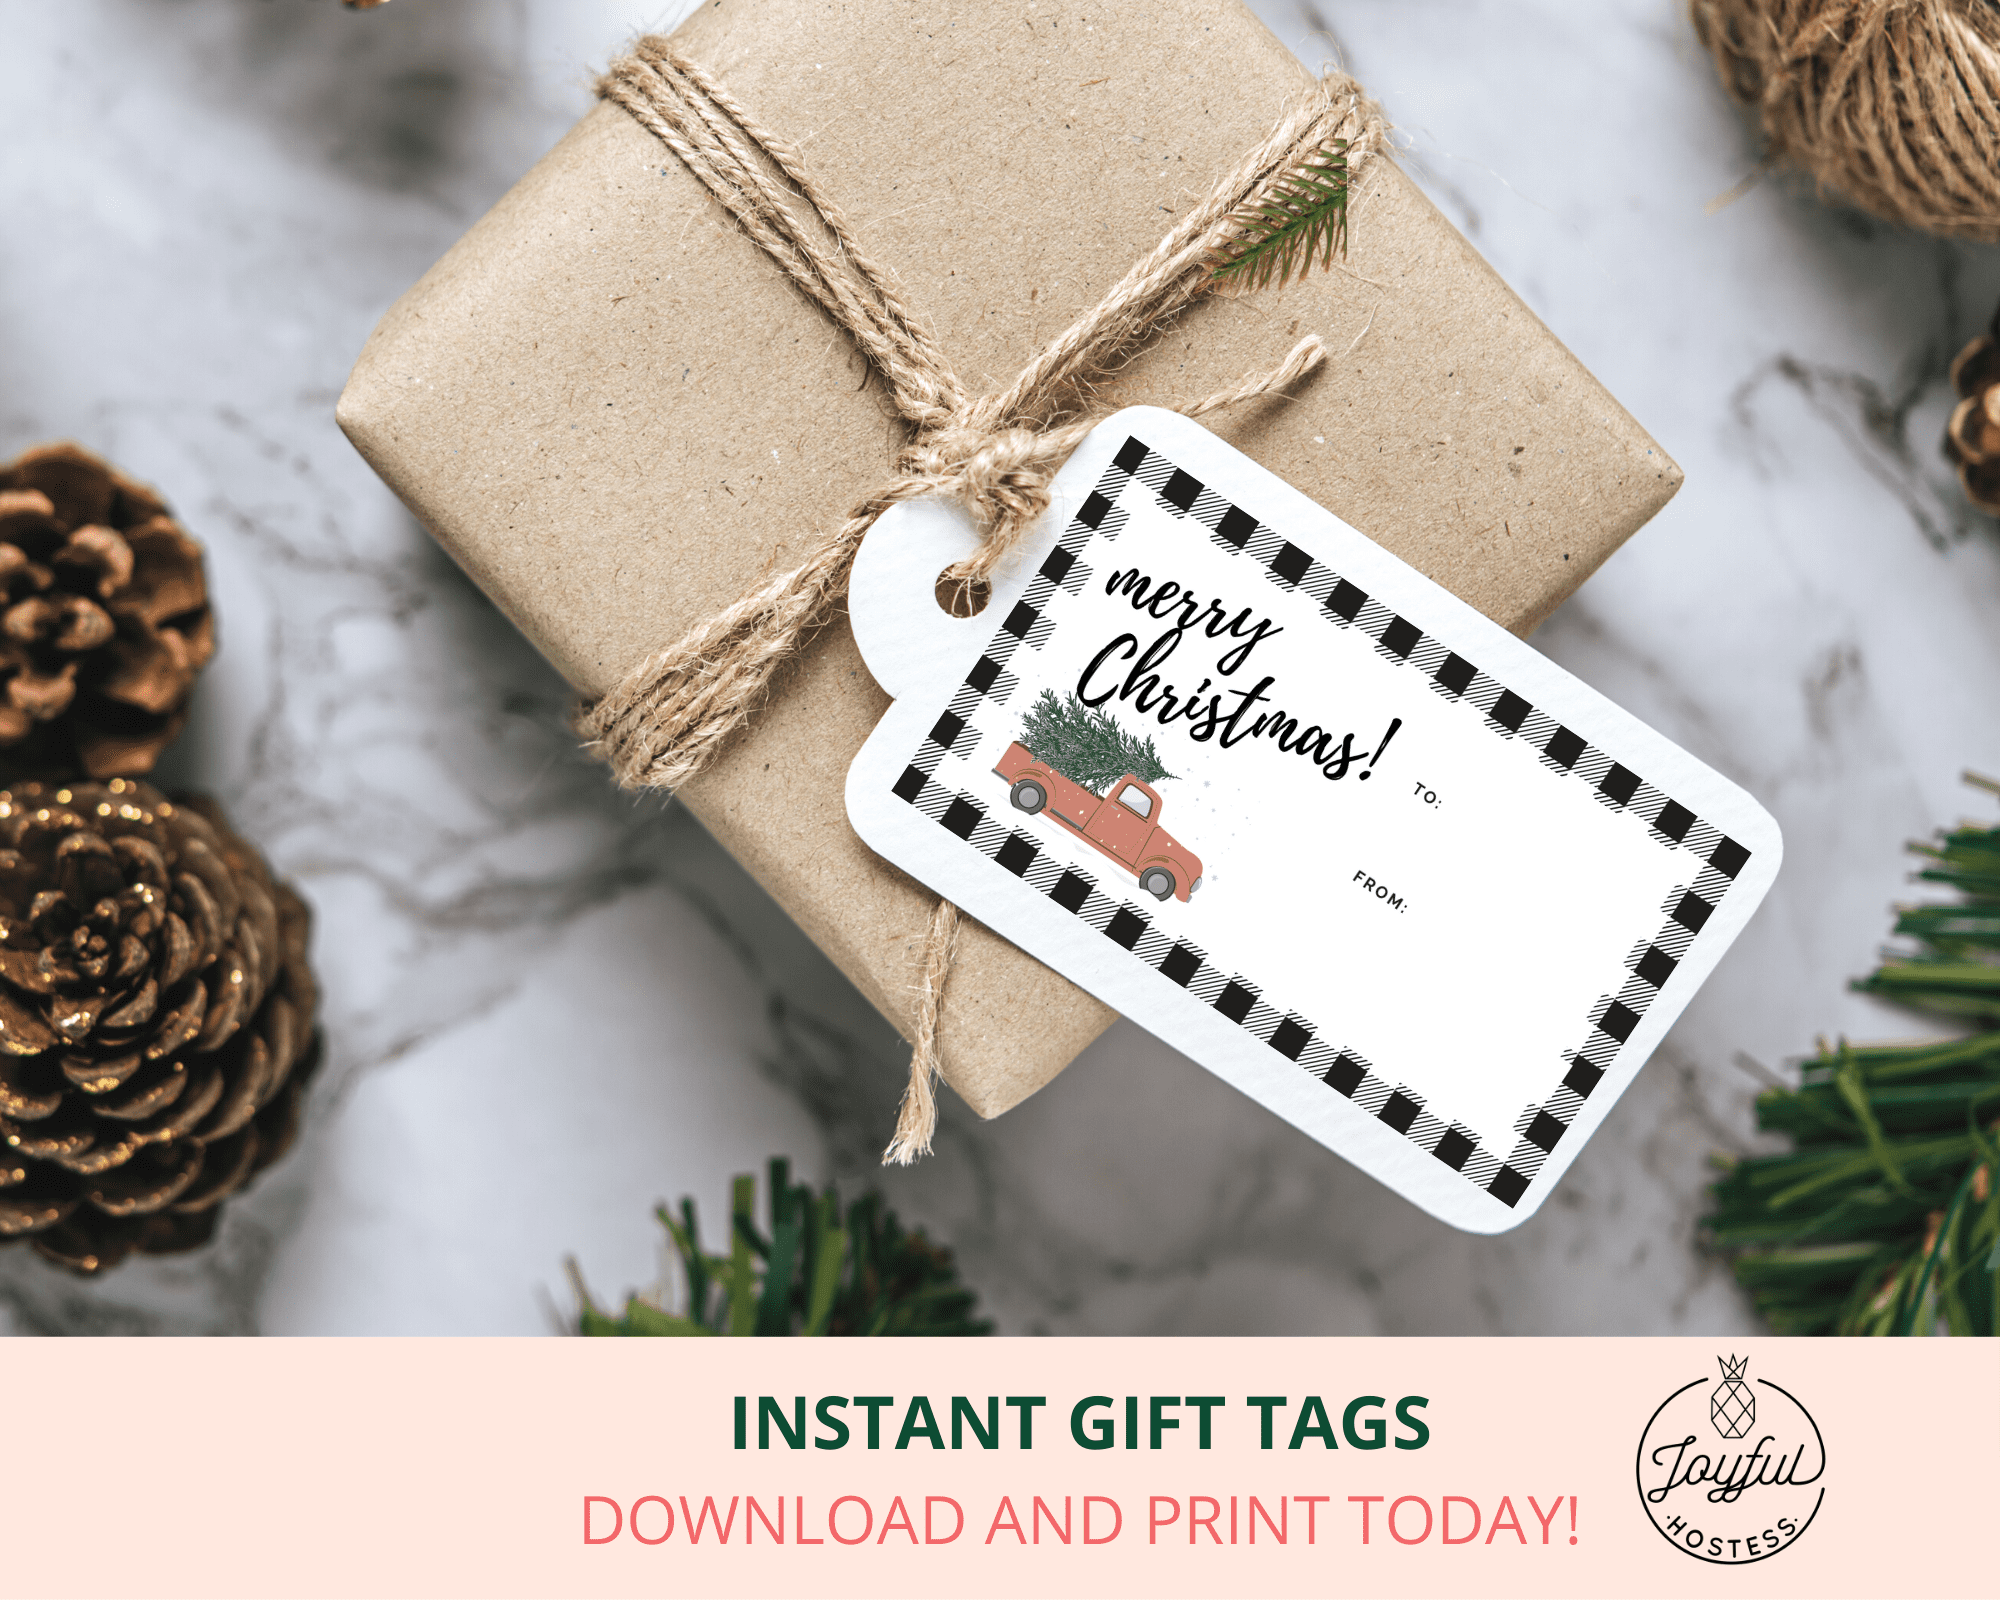 Free Printable Santa Gift Tags  Instantly Download and Print